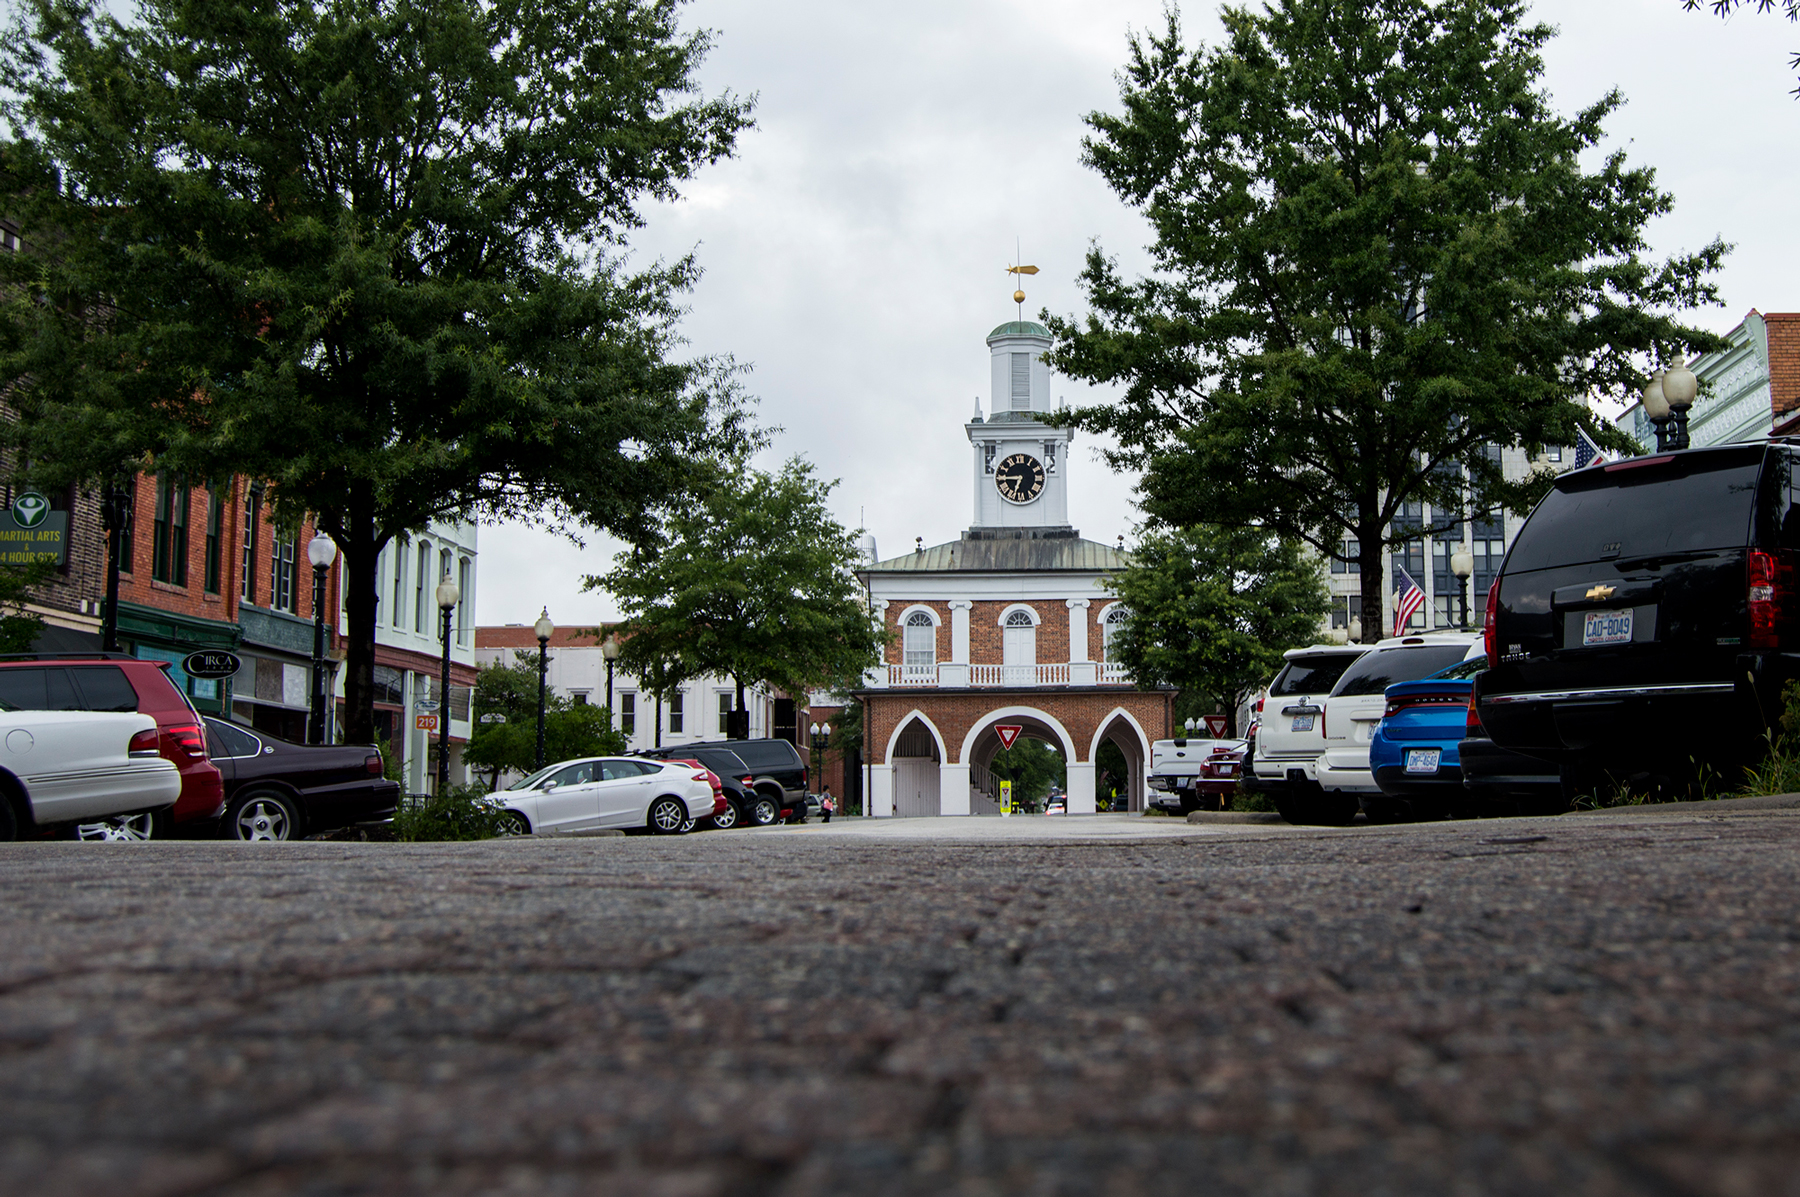 The Market House in Fayetteville, North Carolina, was named a national historic landmark in 1973. It was built in 1832. (Michael Olinger/News21)